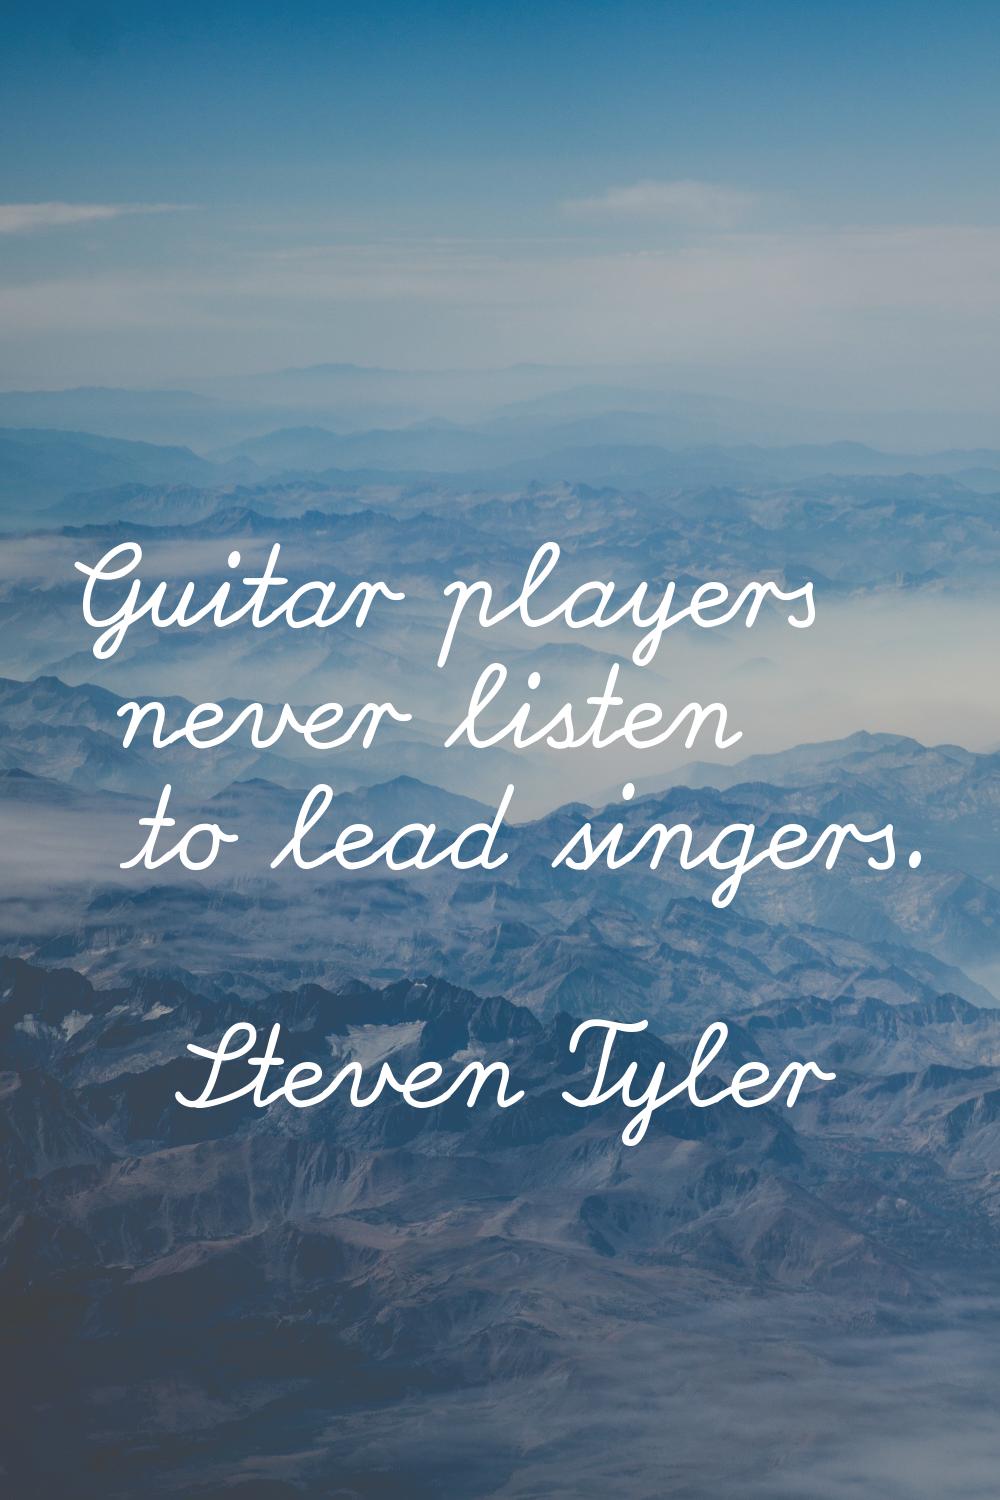 Guitar players never listen to lead singers.